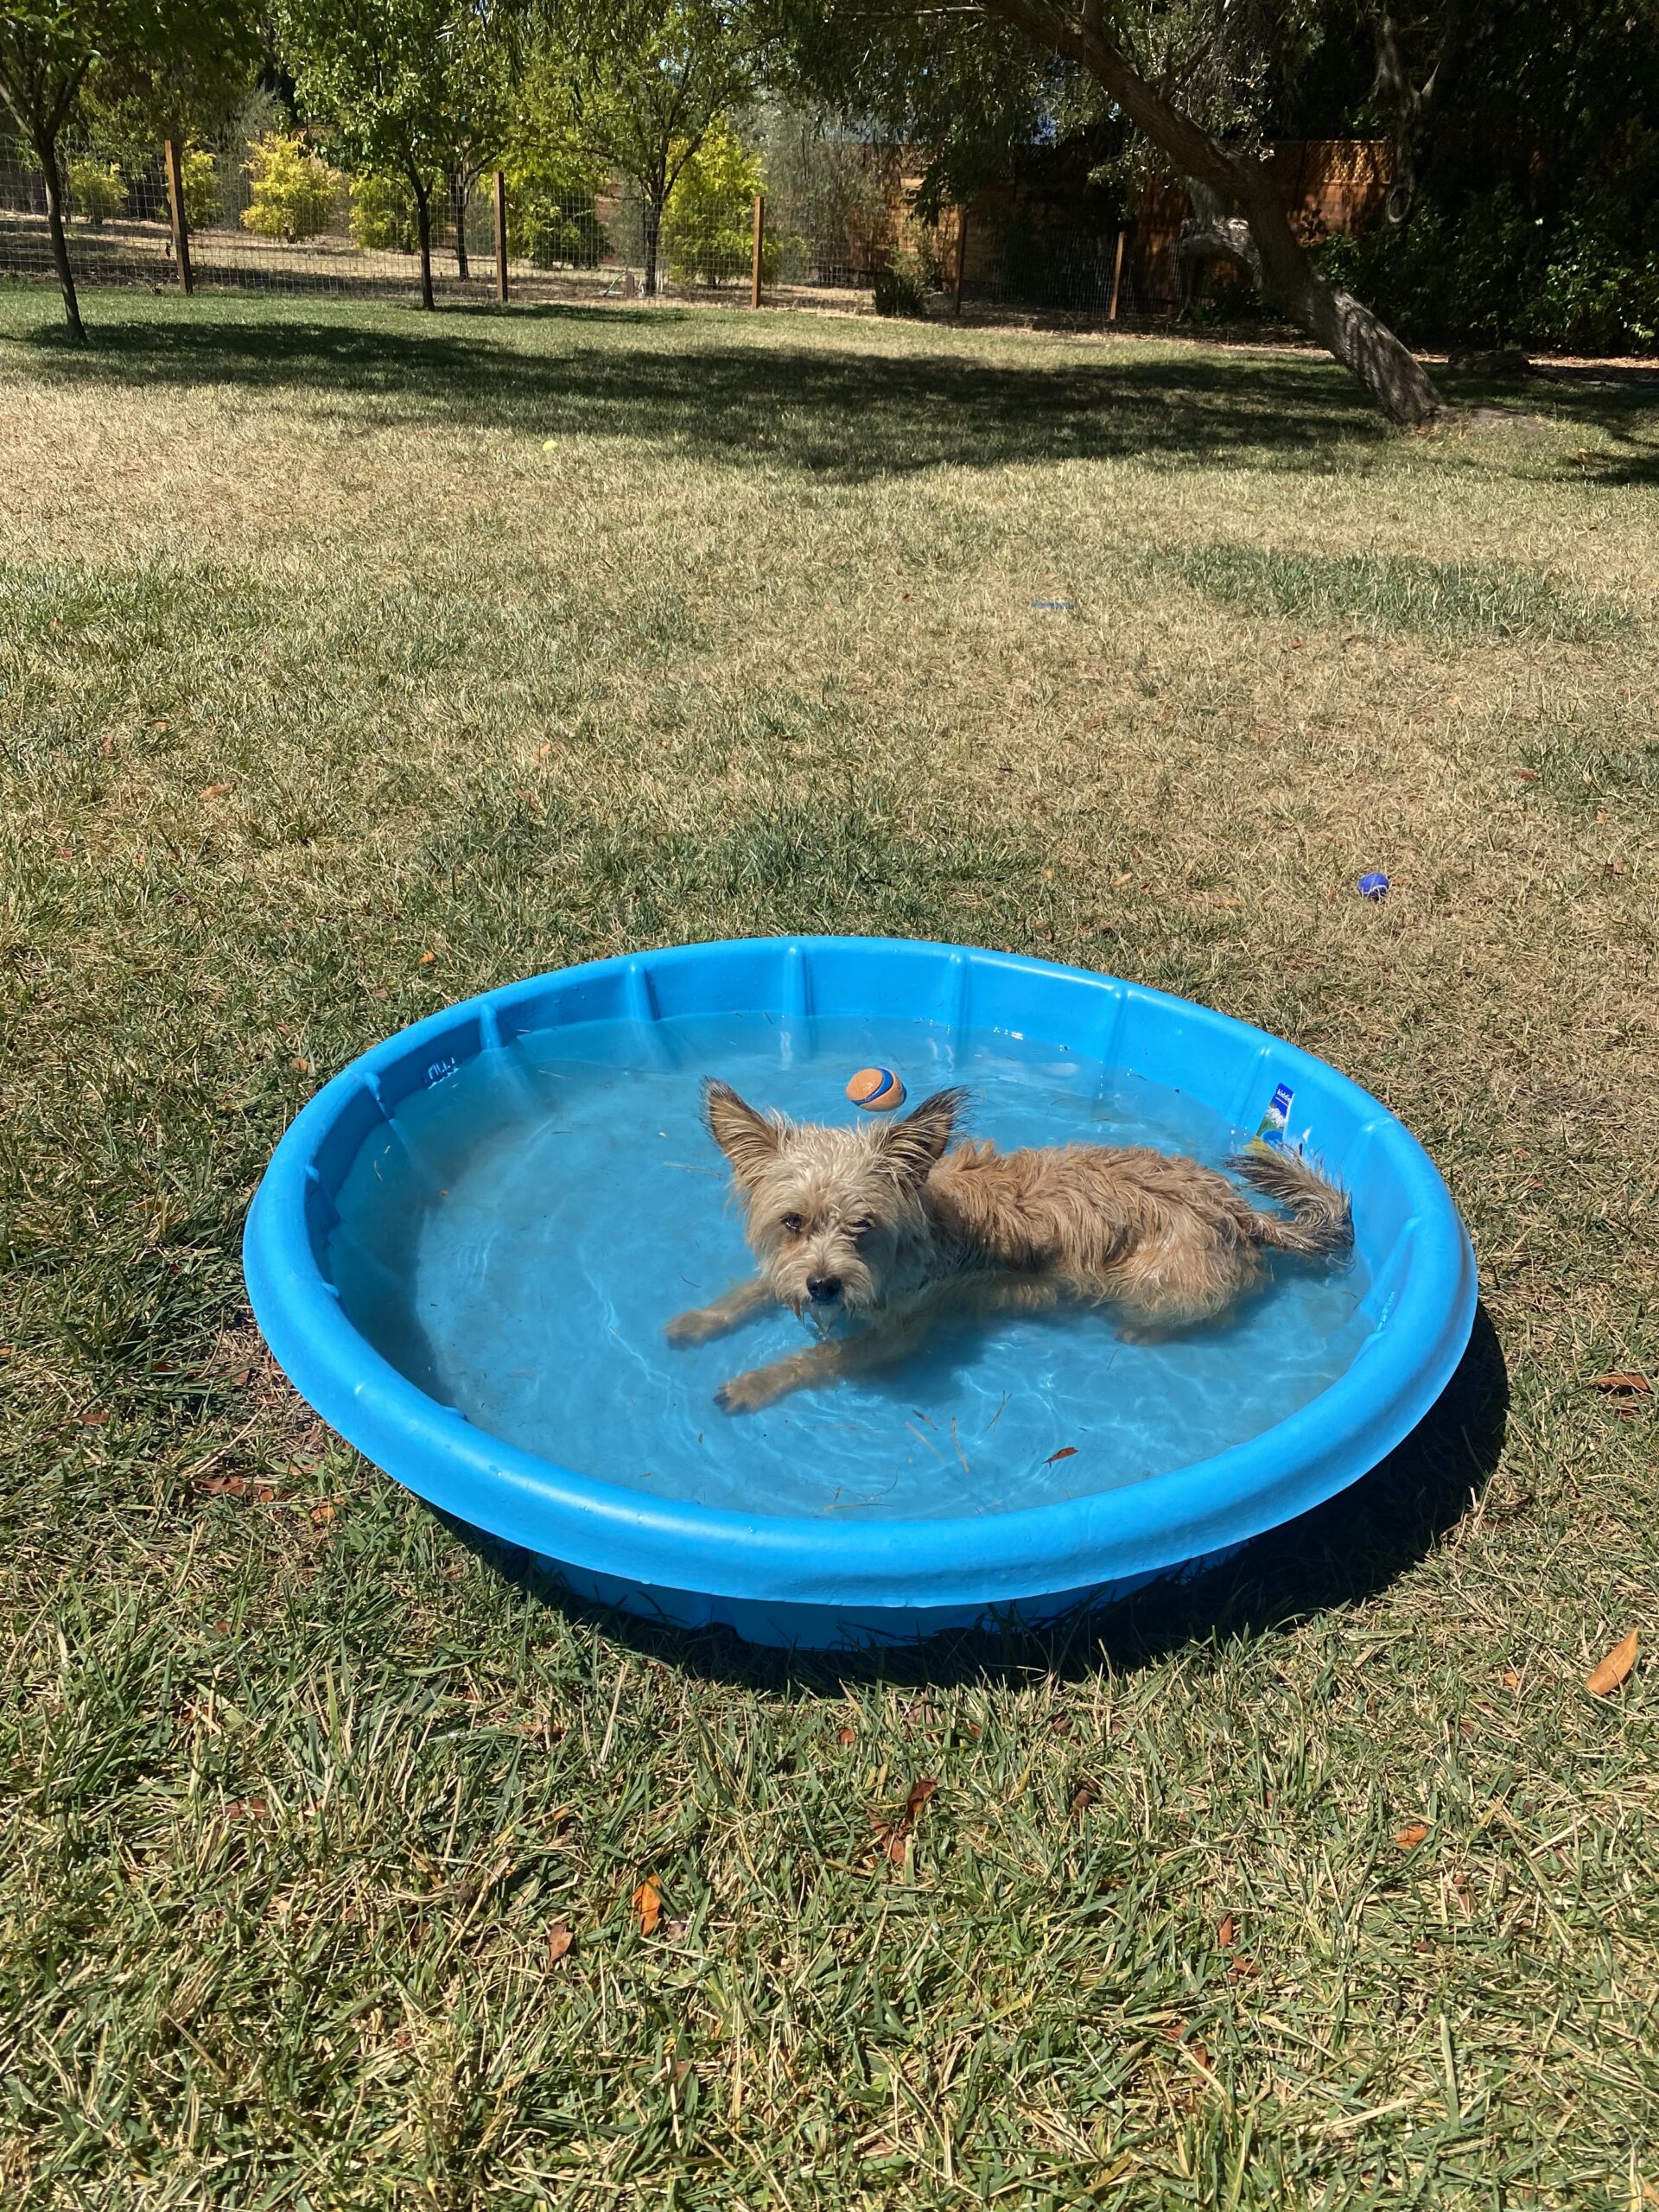 Cairn Terrier dog in a small blue tub